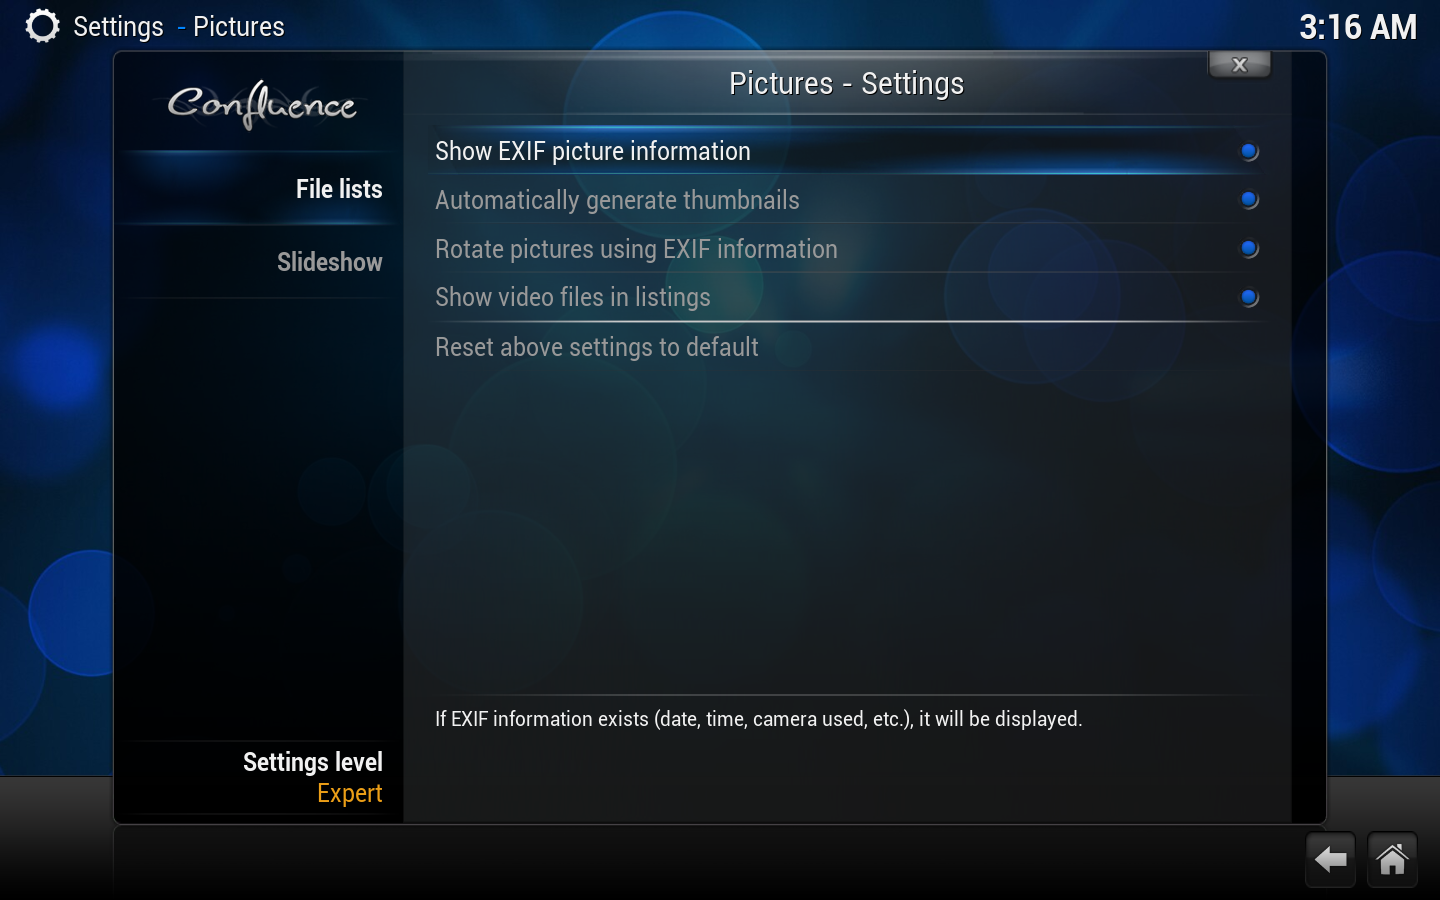 File:Settings.pictures.general.png